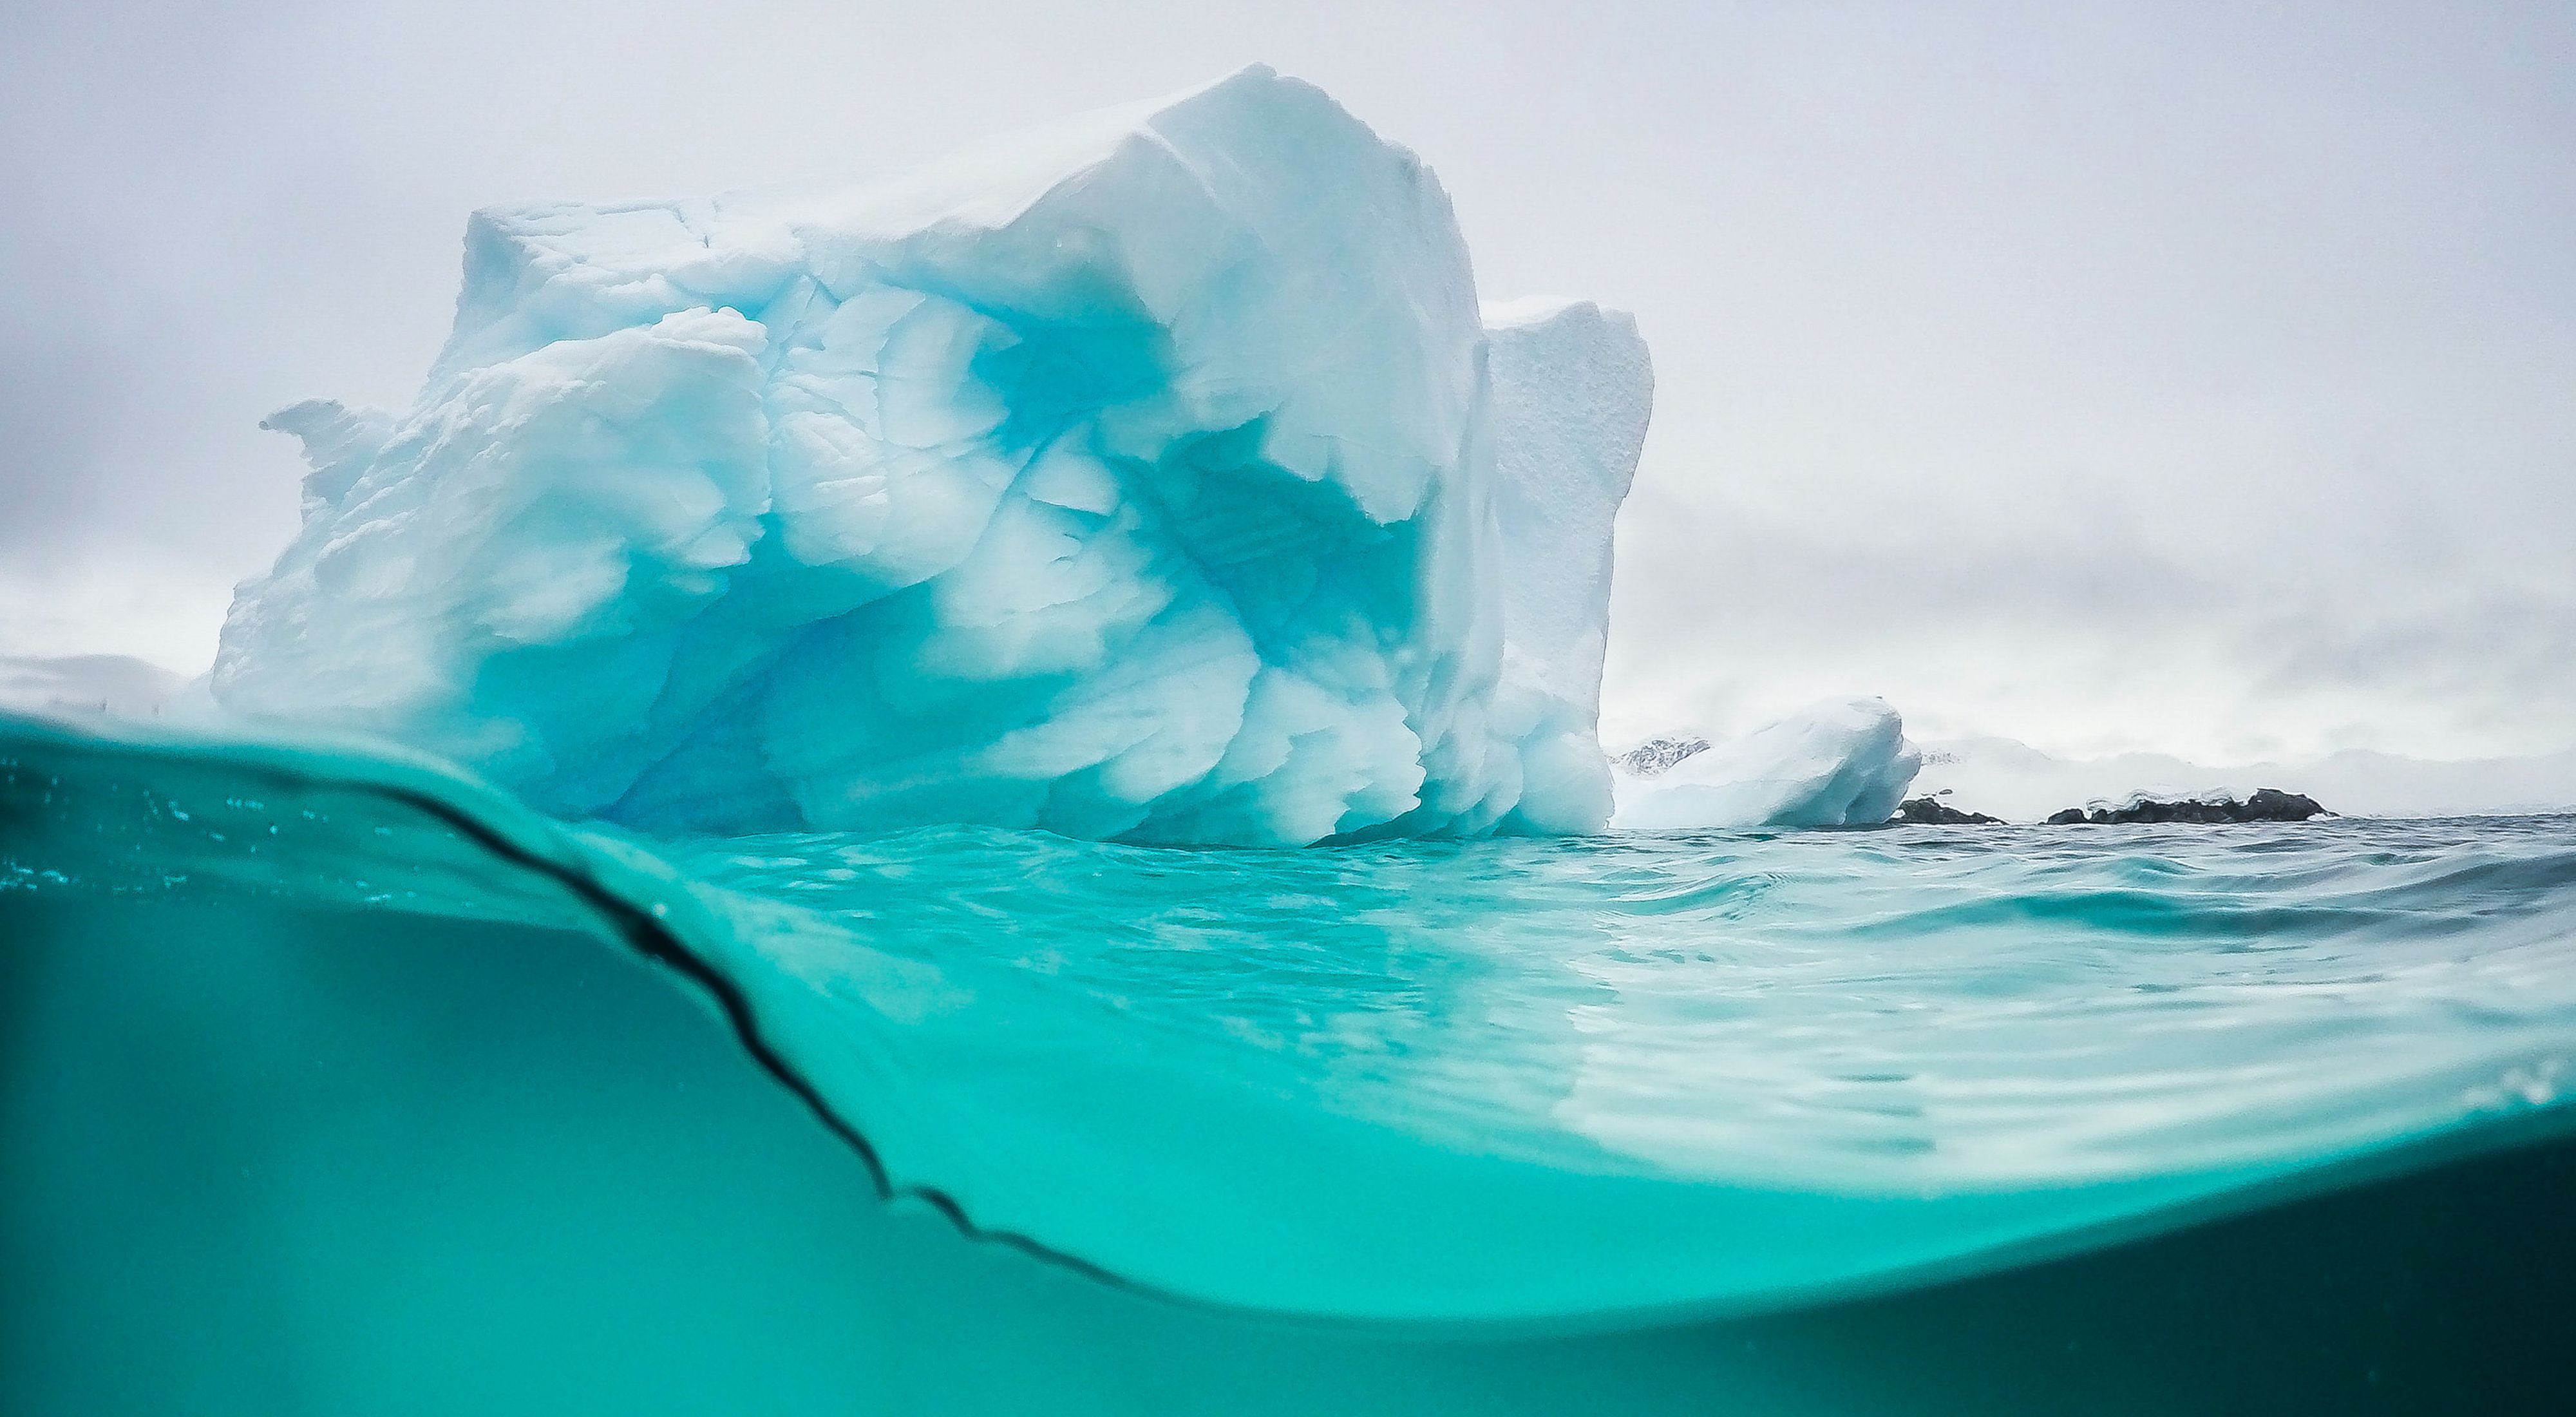 Half view under and above the surface of an iceberg in Antarctica